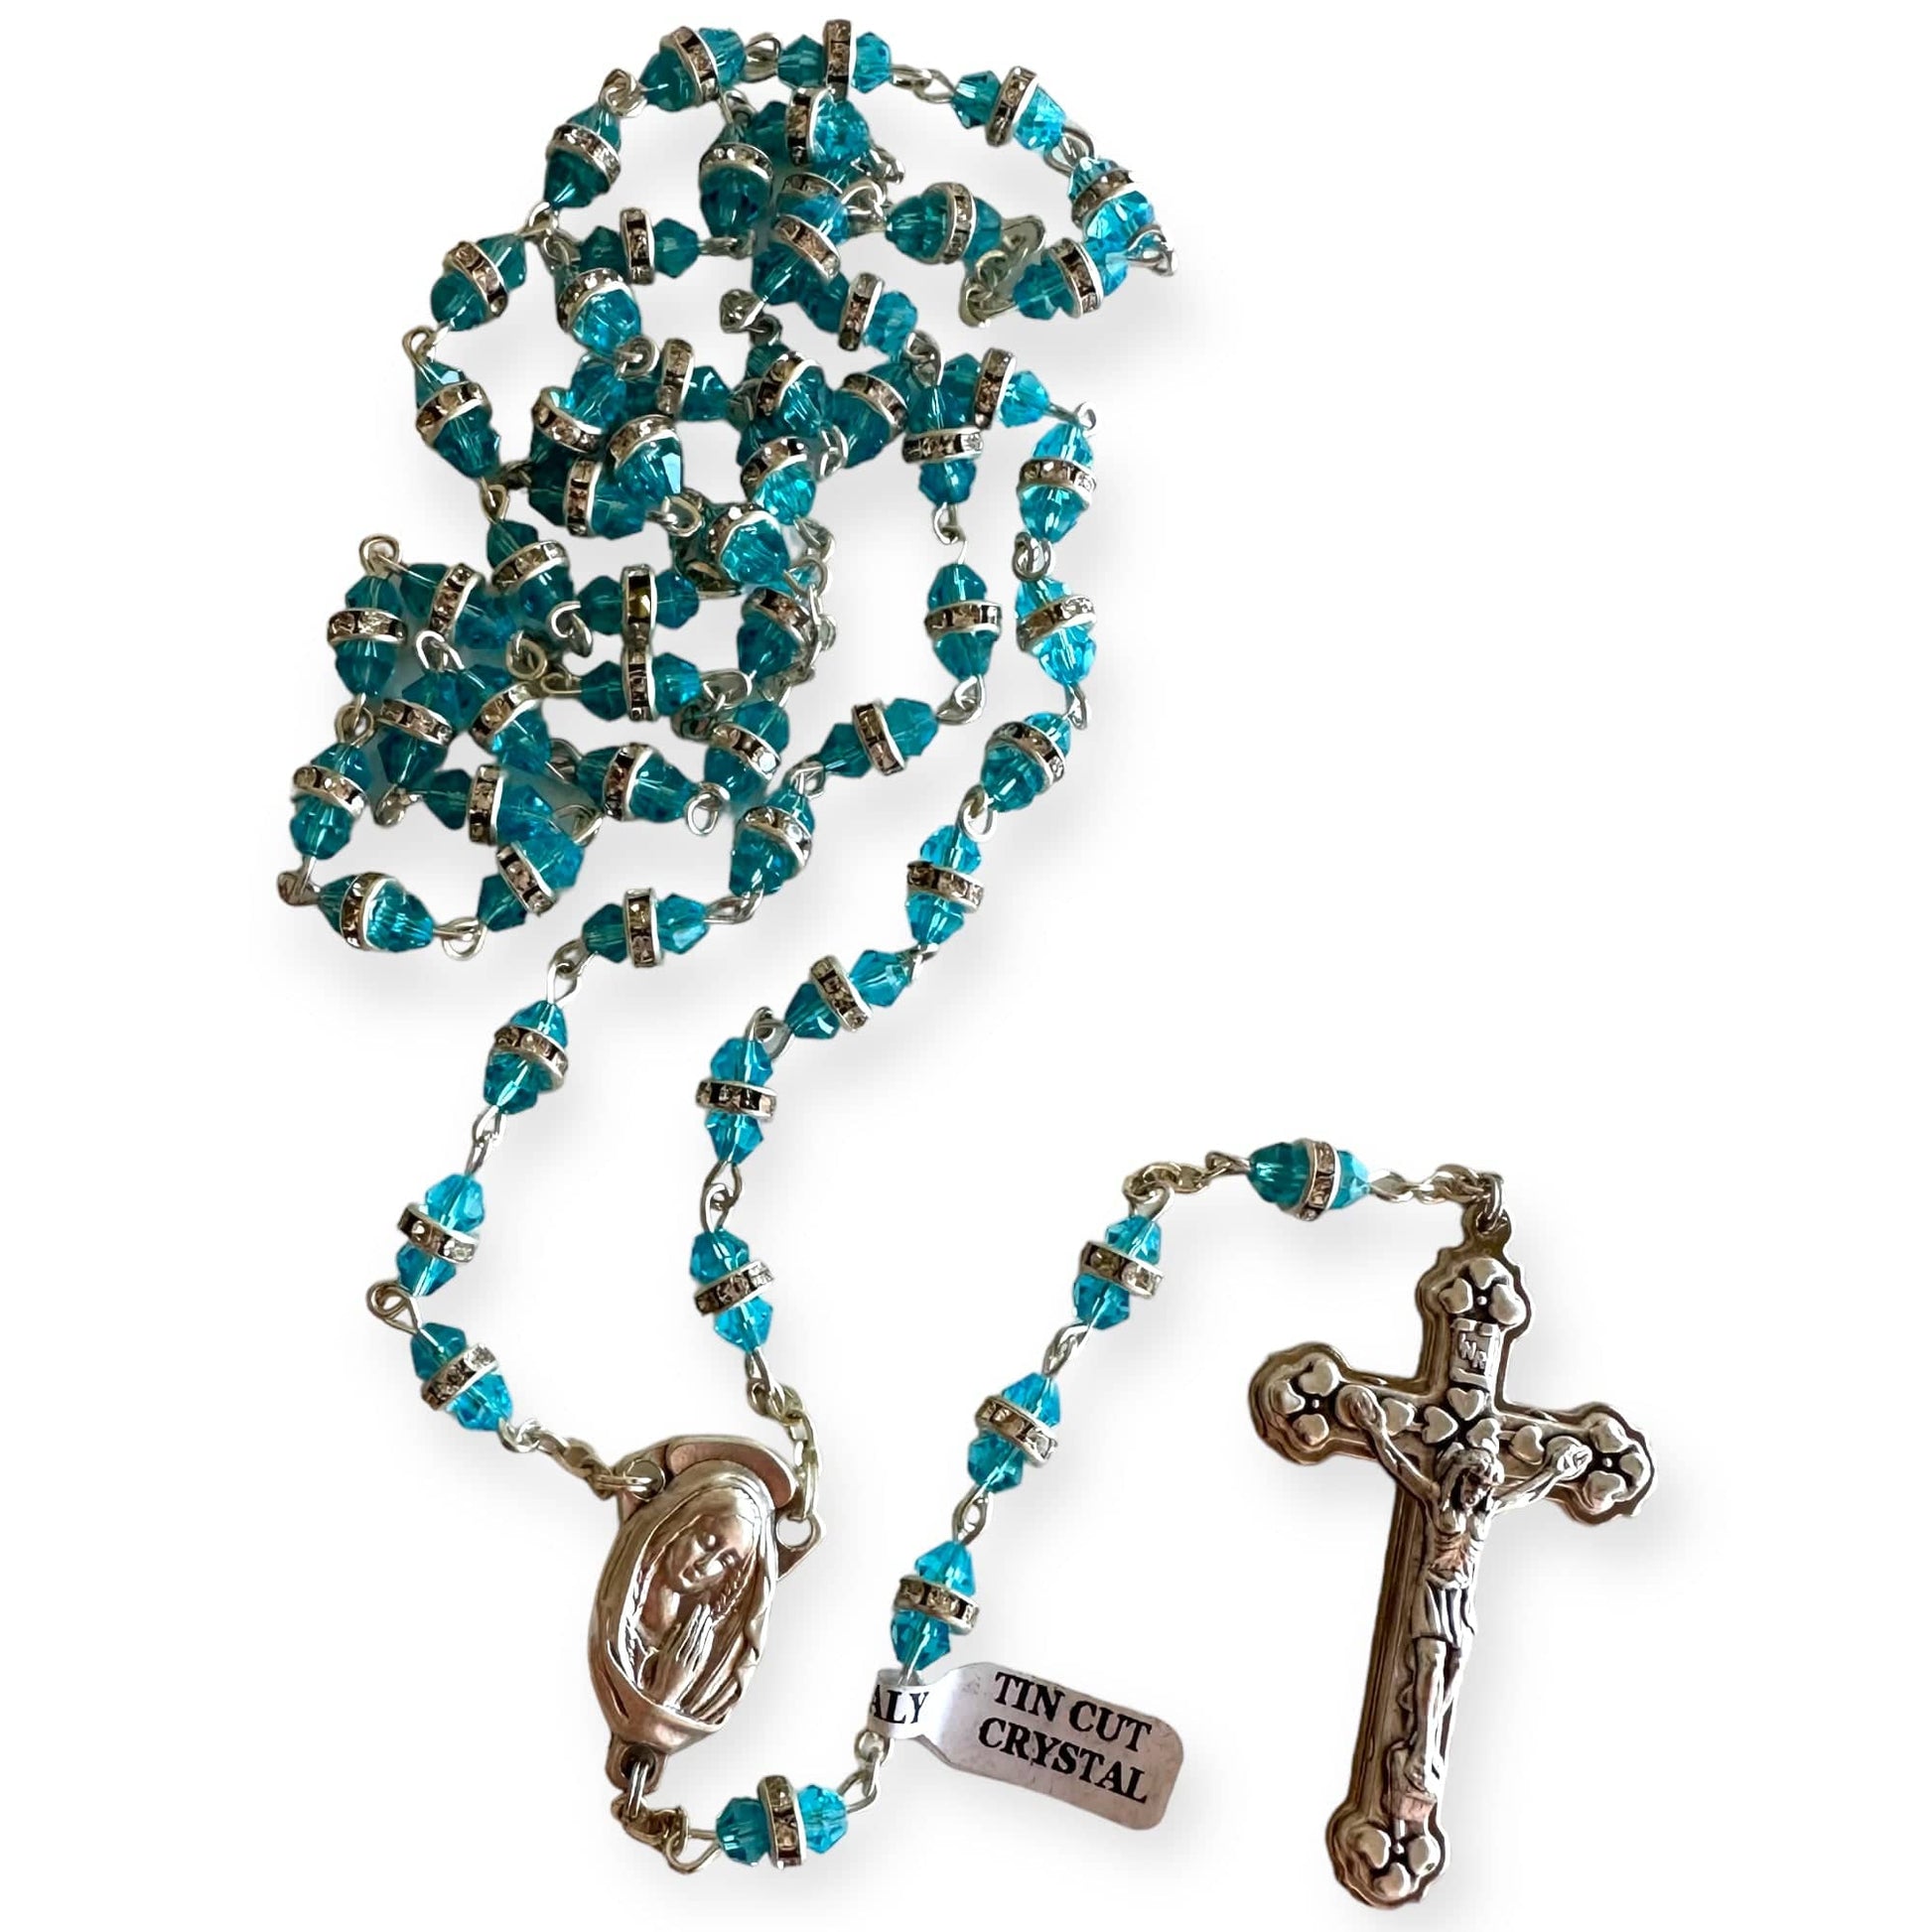 Catholically Rosaries Blessed Virgin Mary - Aqua Shiny Crystal Rosary - Rhinestone - Blessed By Pope